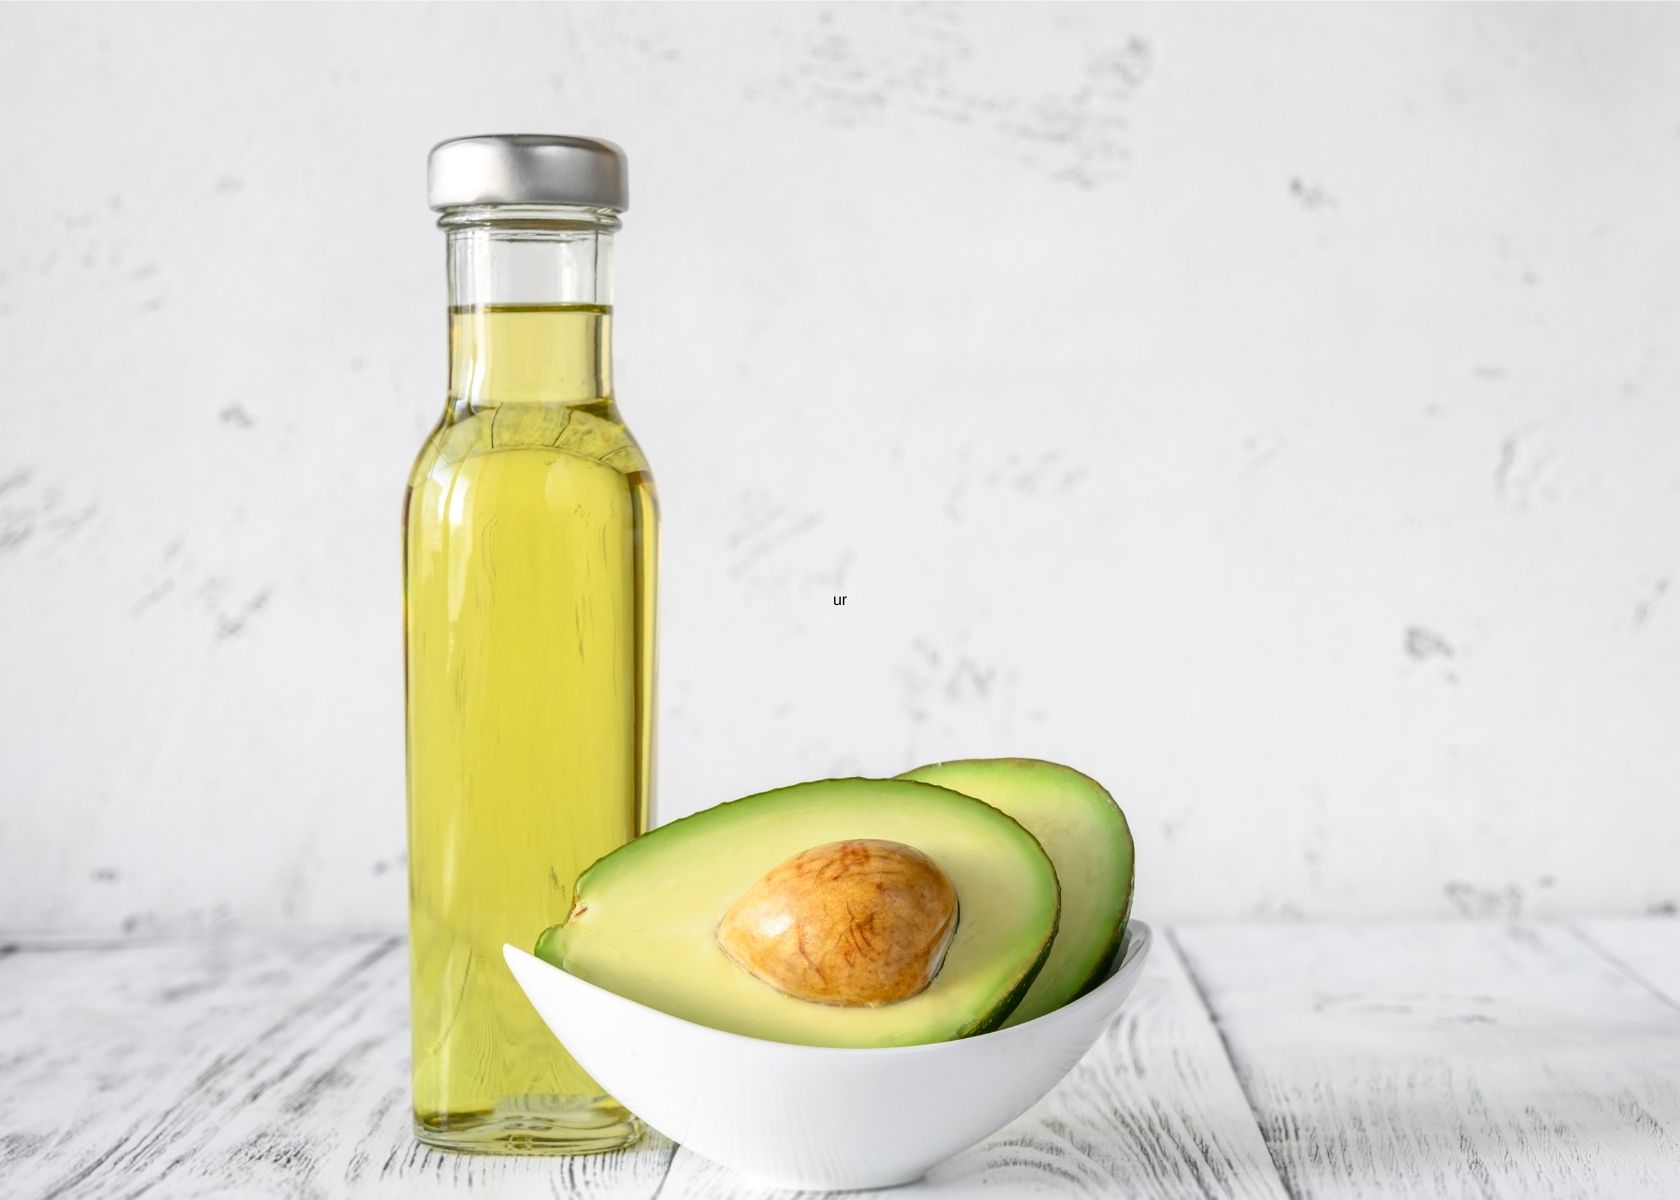 Avocado oil in glass bottle next to white bowl of cut avocados.